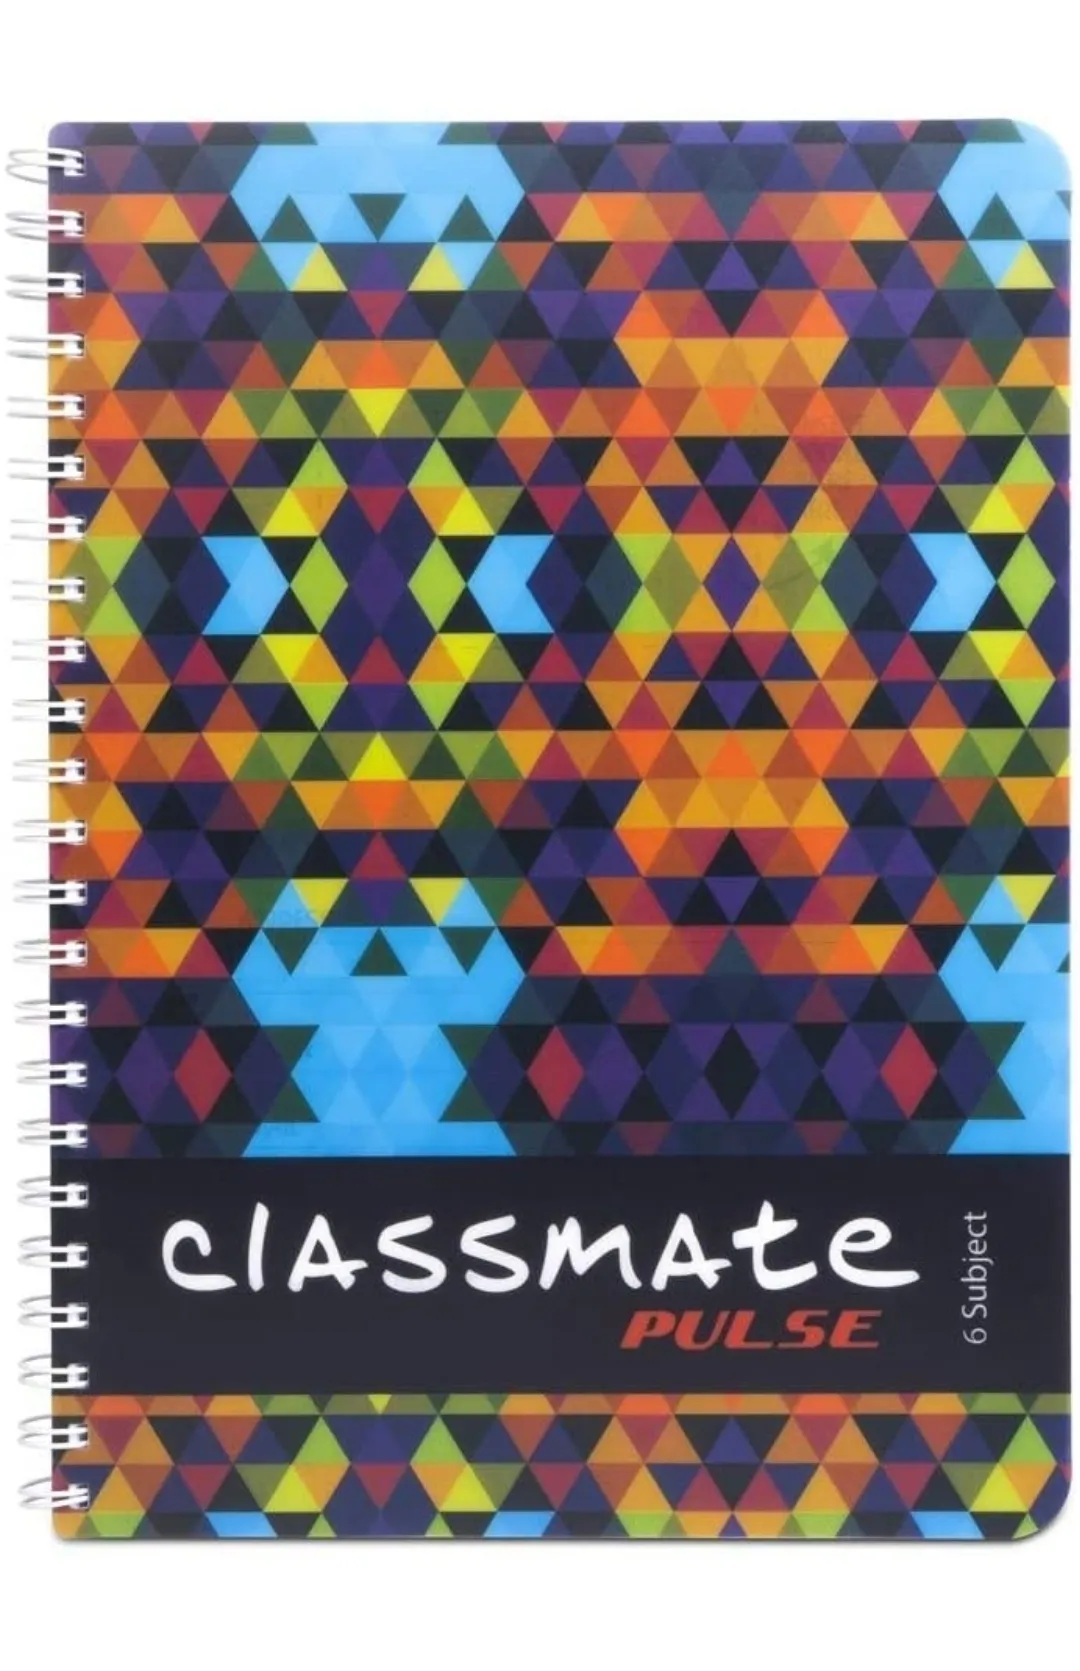 Classmate Pulse Notebook Soft Cover 6 Subject Spiral Binding Notebook Unruled 29.7 X 21 cm 300 Pages Pack of 1